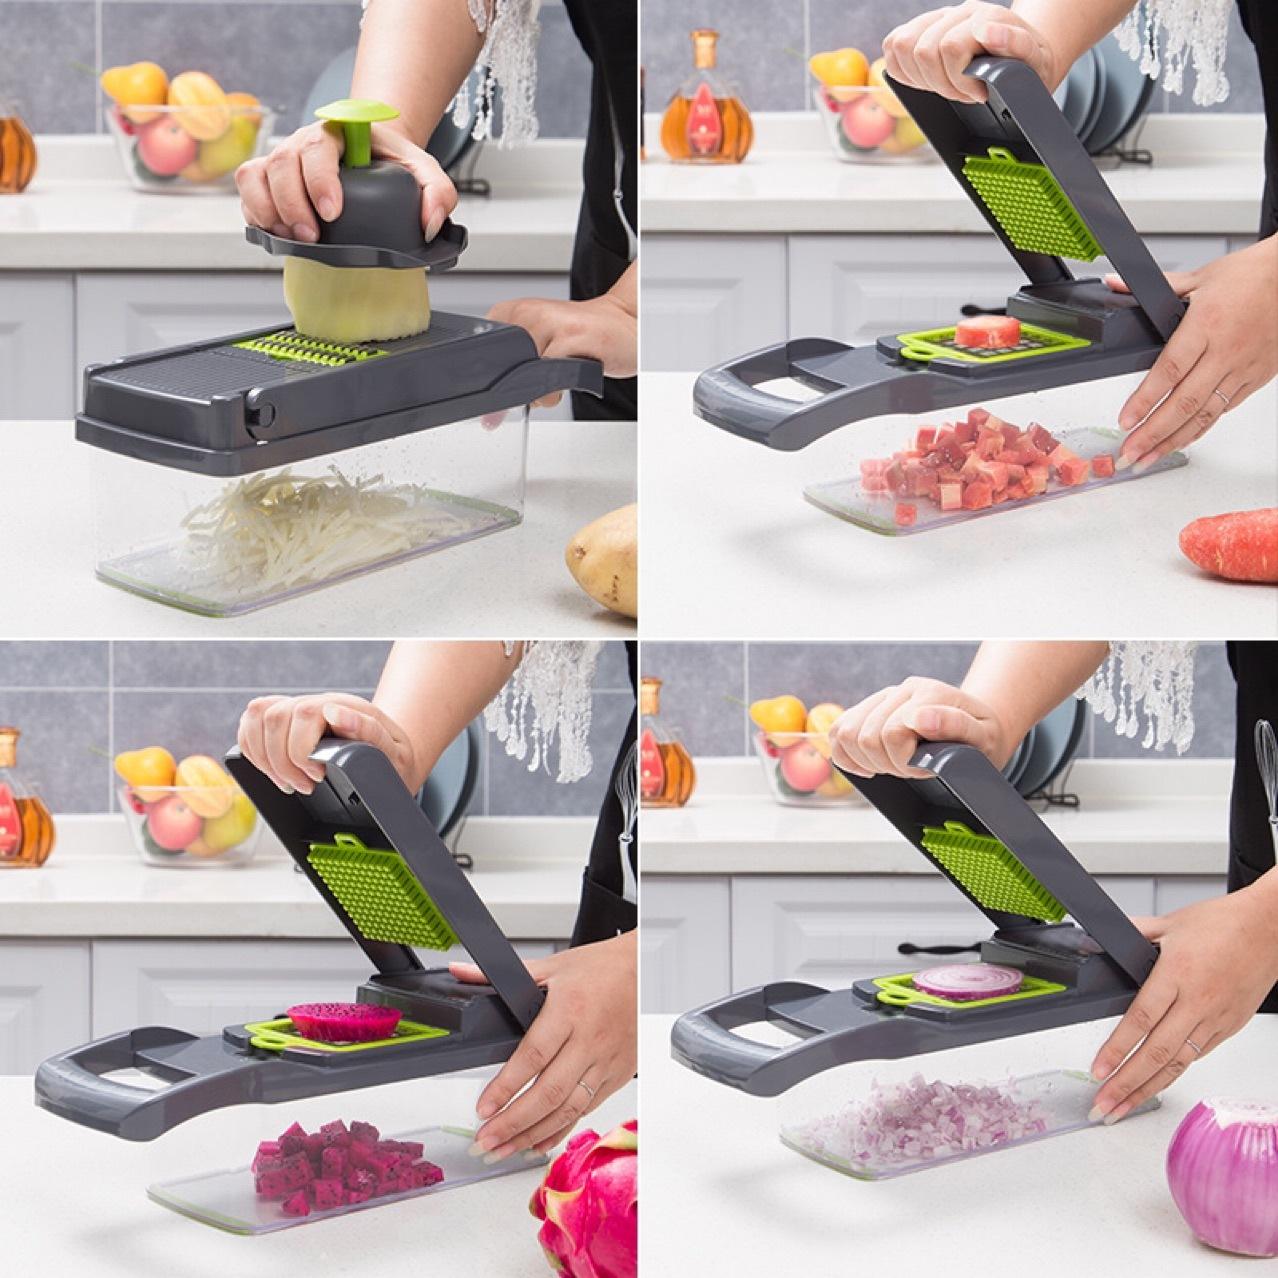 12 In 1 Manual Vegetable Chopper Kitchen Gadgets Food Chopper Onion Cutter Vegetable Slicer - Little Commodities